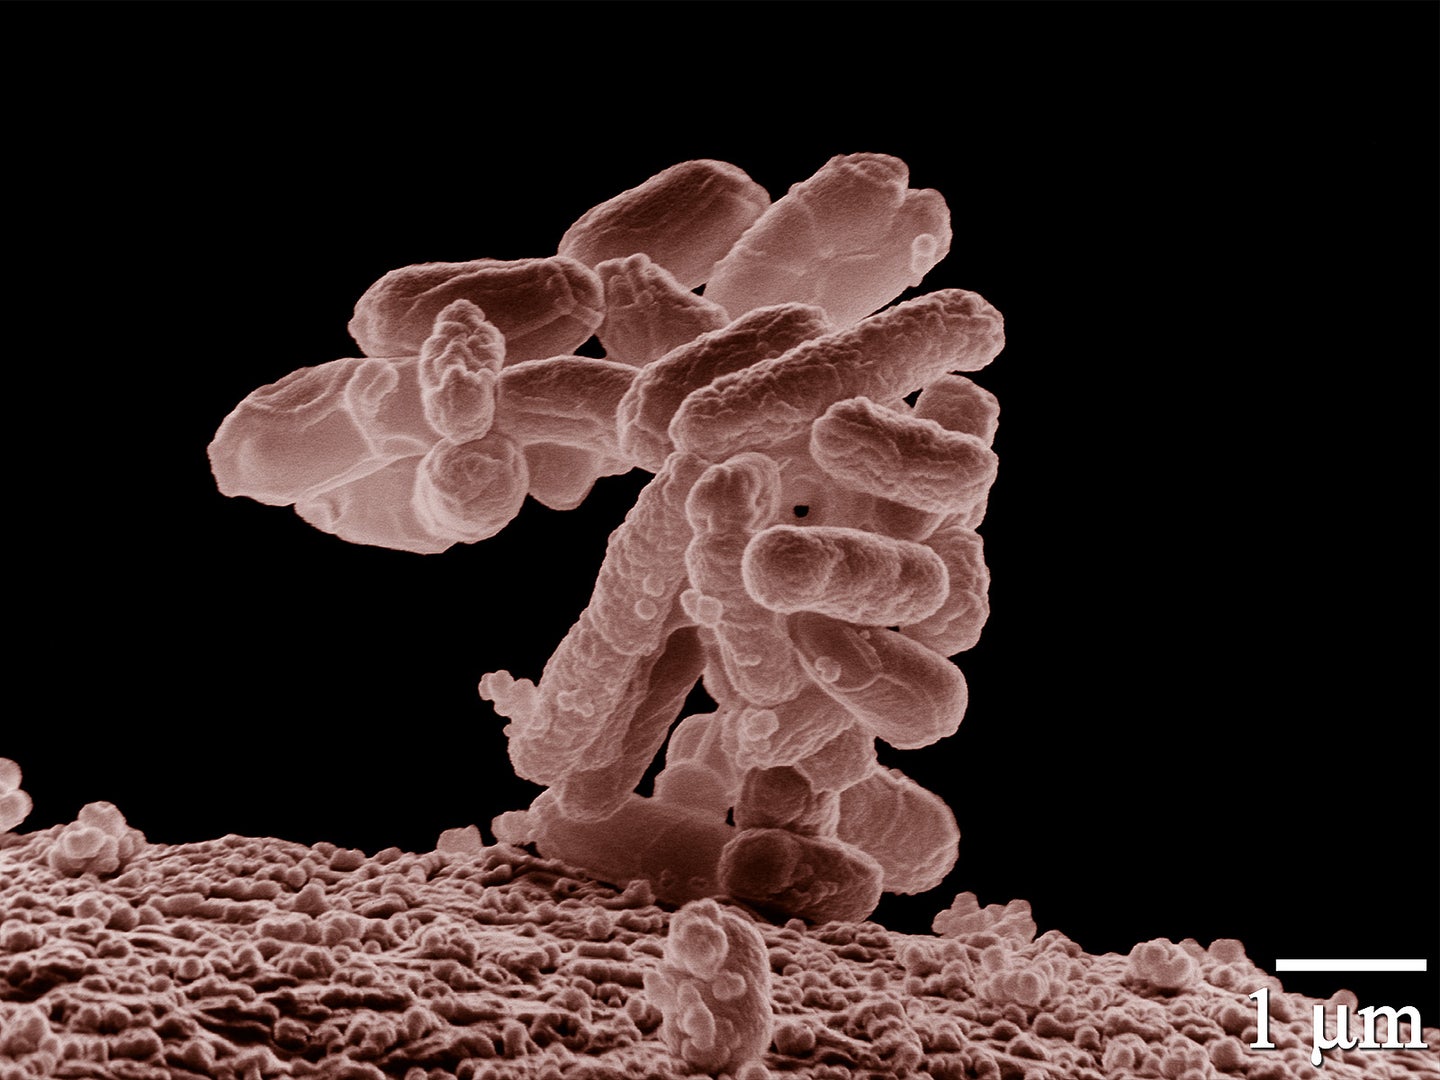 Escherichia coli is a member of the Enterobacteriaceae family of bacteria and is found in the human gut. Researchers have found several species of bacteria, including E. coli, carrying a gene that confers resistance to a class of last-resort antibiotics on a swine farm.